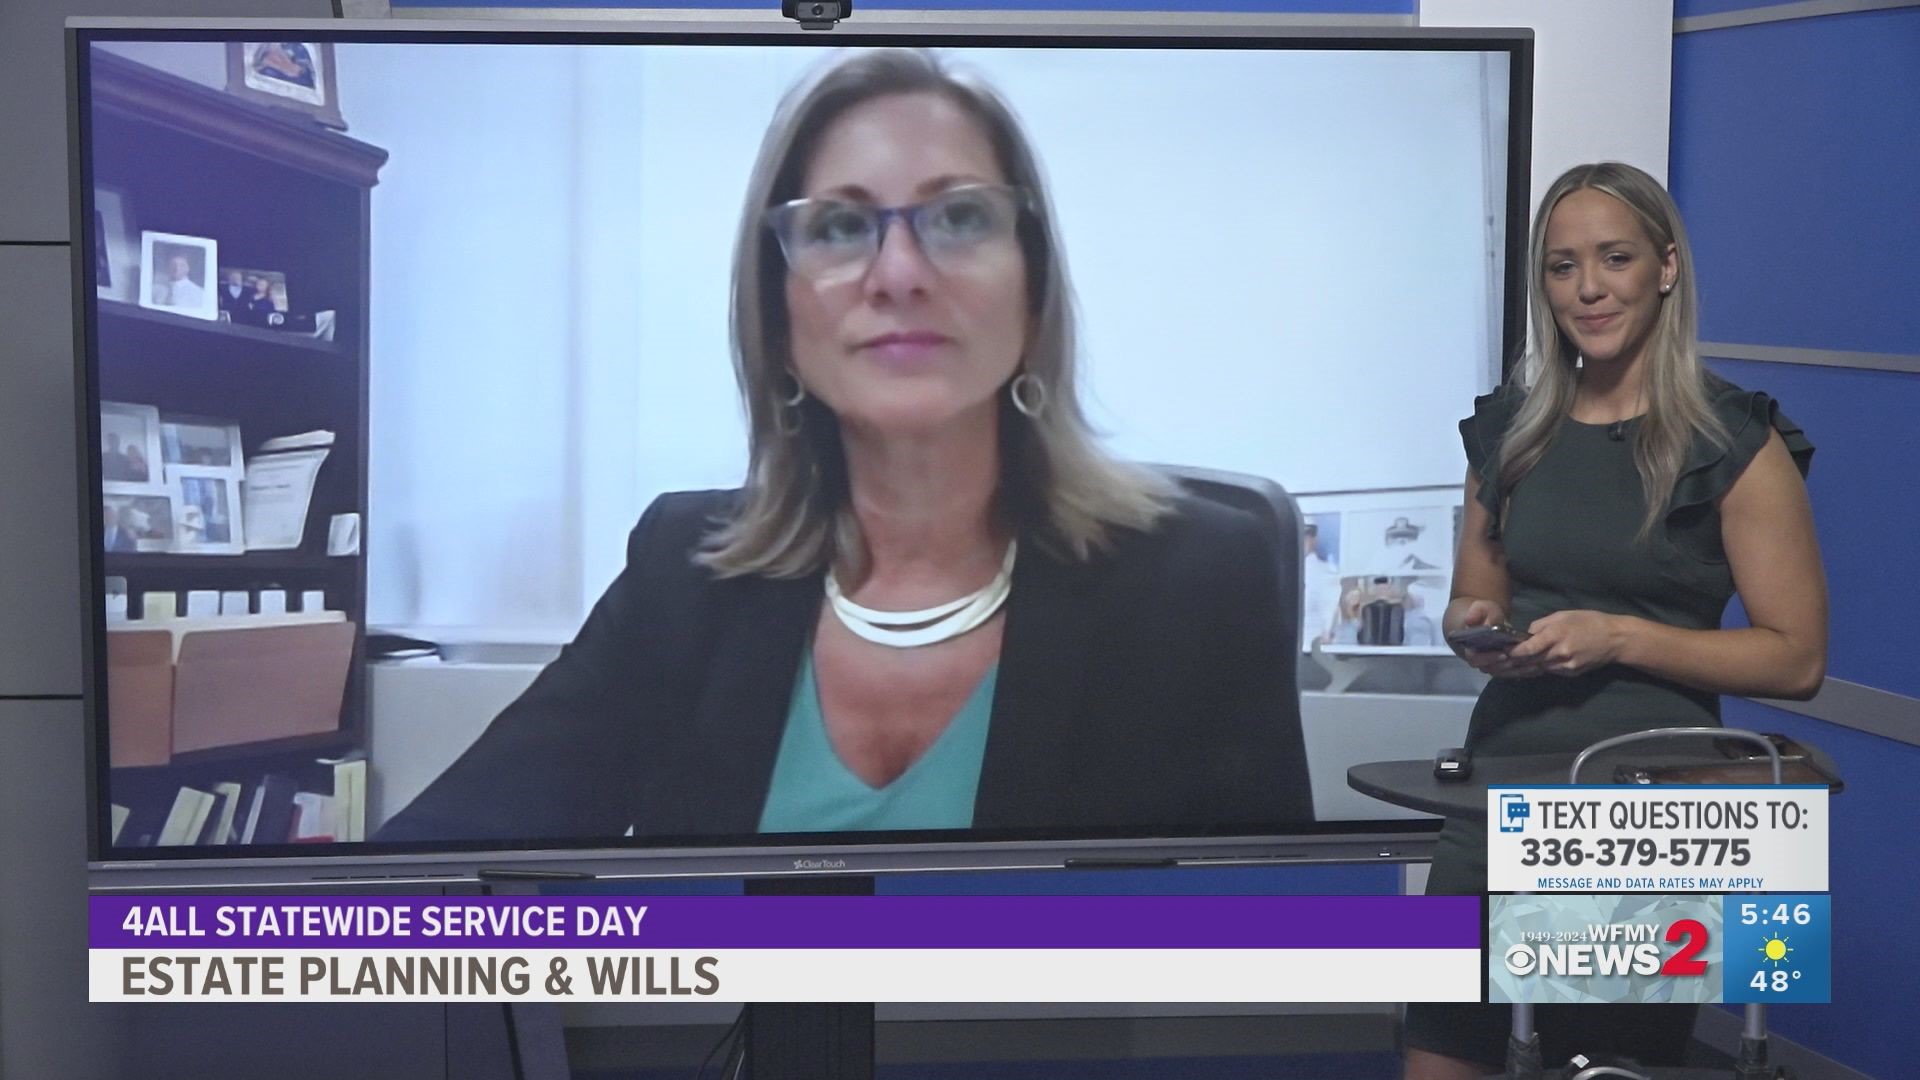 Ahead of 4All Statewide Service Day, we spoke to a lawyer who specializes in estate planning and wills.